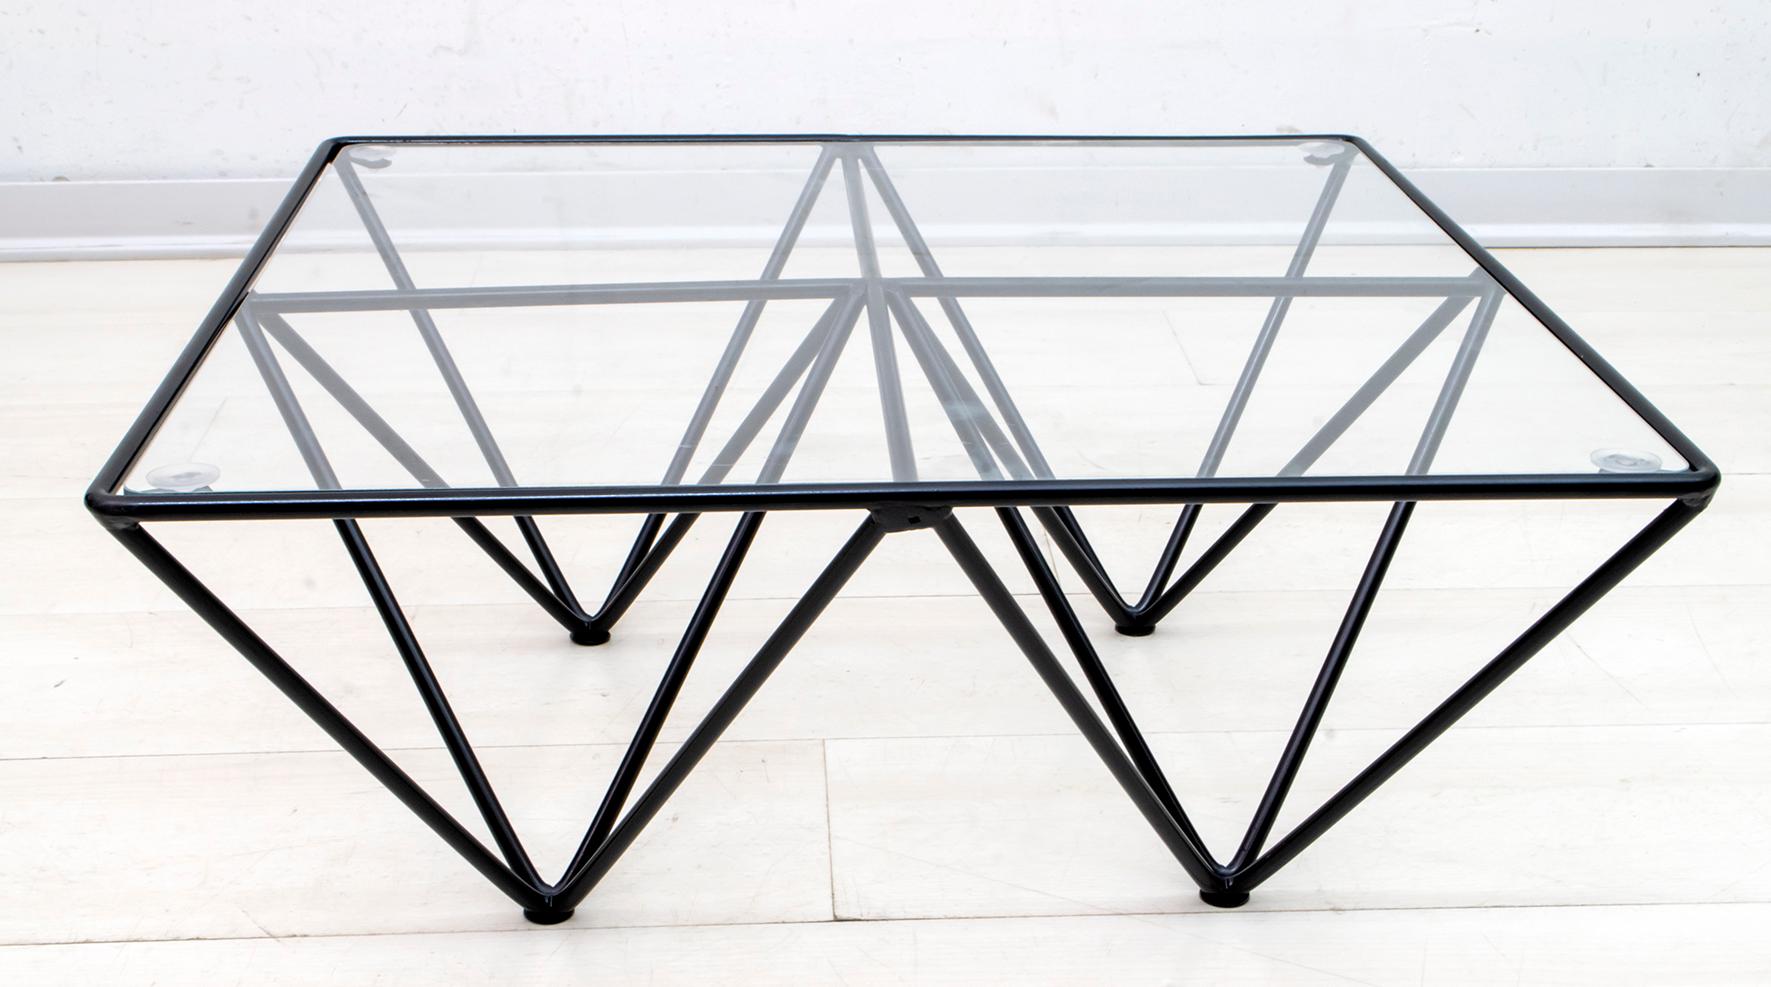 The structure of the table is in black lacquered steel tube, shaped in a square shape with black plastic bases. A clear glass top with no dots created a light and elegant look. The conditions are very good and the table is ready to be inhabited. All